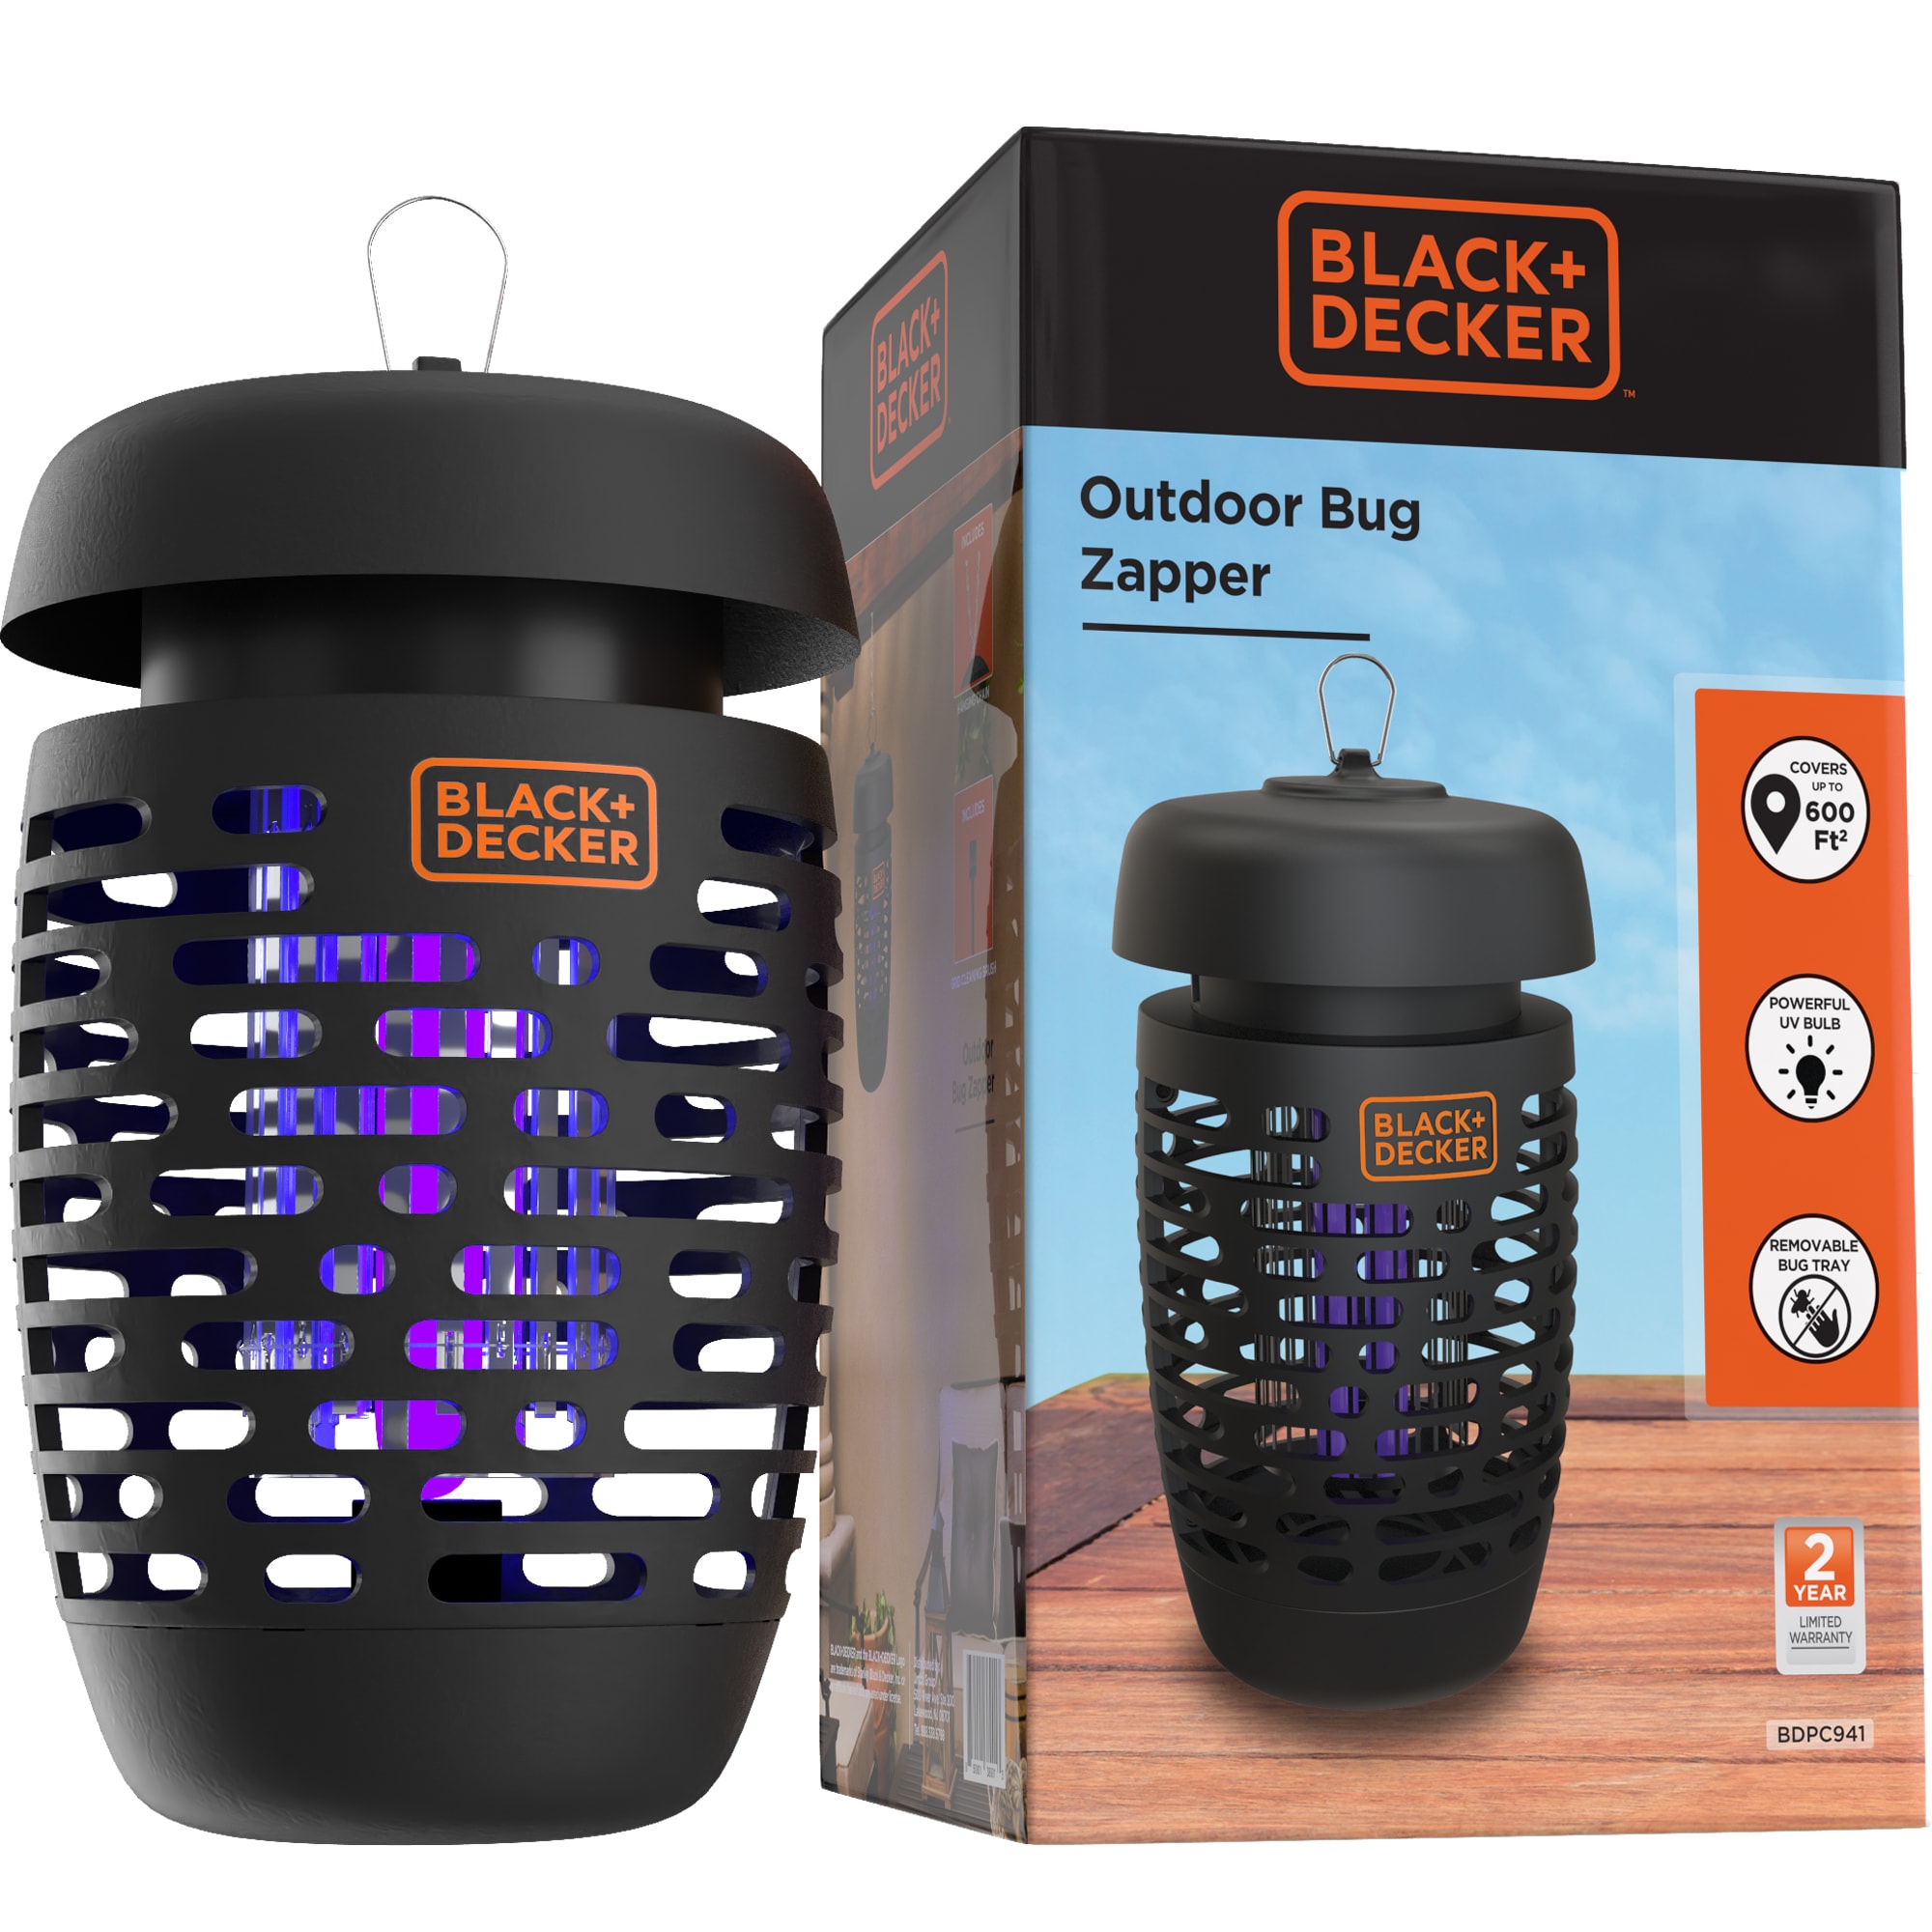 BLACK+DECKER Bug Zapper Electric UV Insect Catcher and Killer - 36